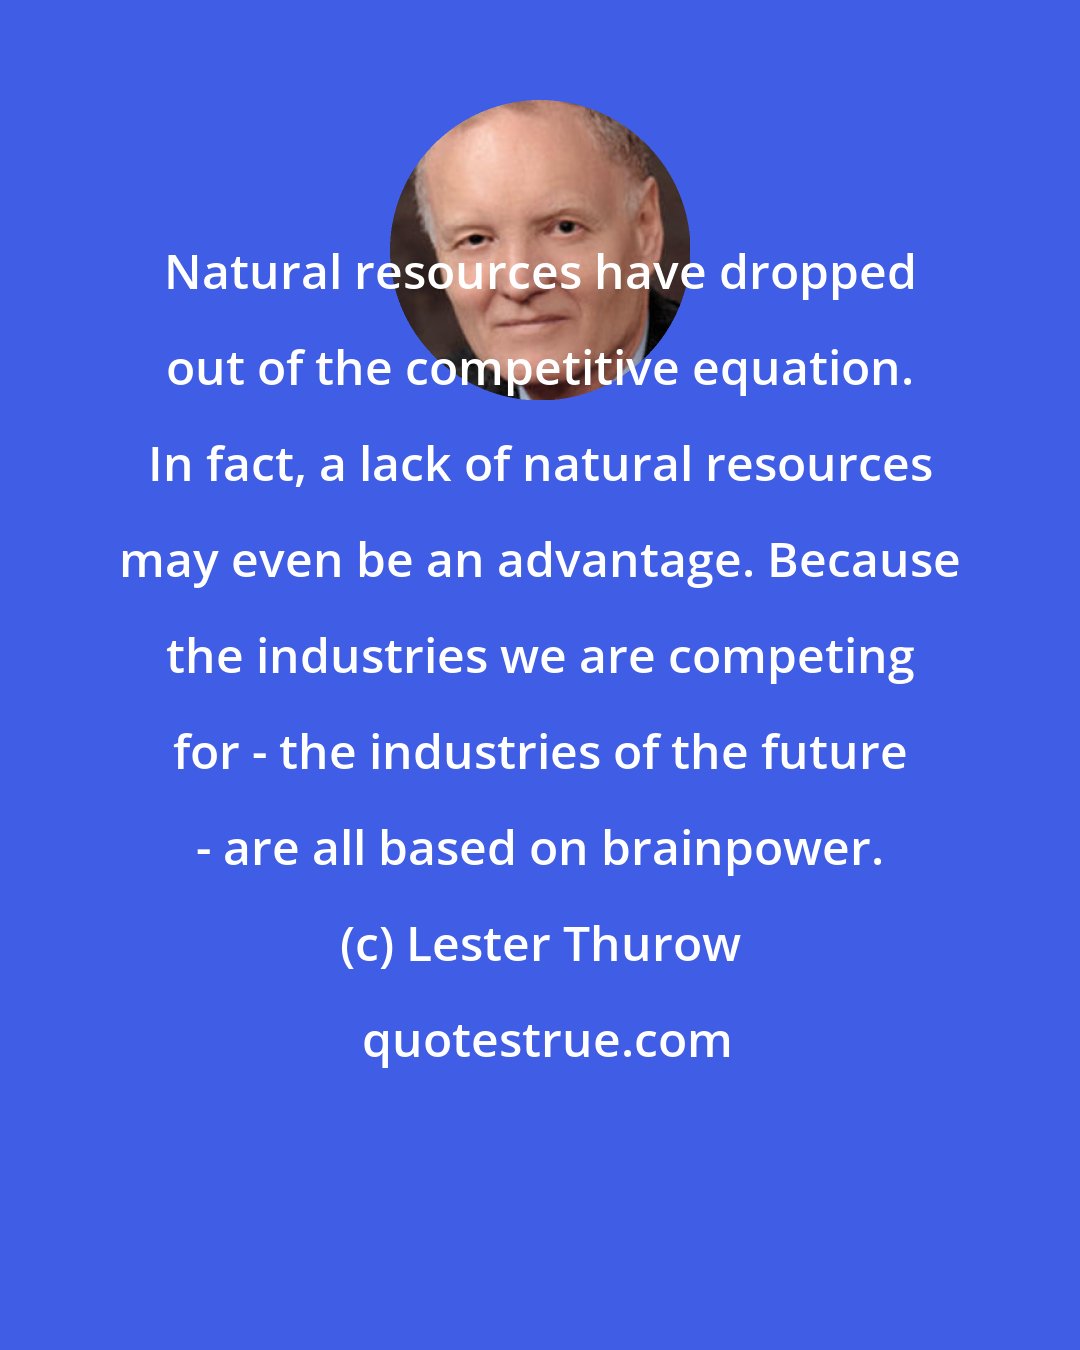 Lester Thurow: Natural resources have dropped out of the competitive equation. In fact, a lack of natural resources may even be an advantage. Because the industries we are competing for - the industries of the future - are all based on brainpower.